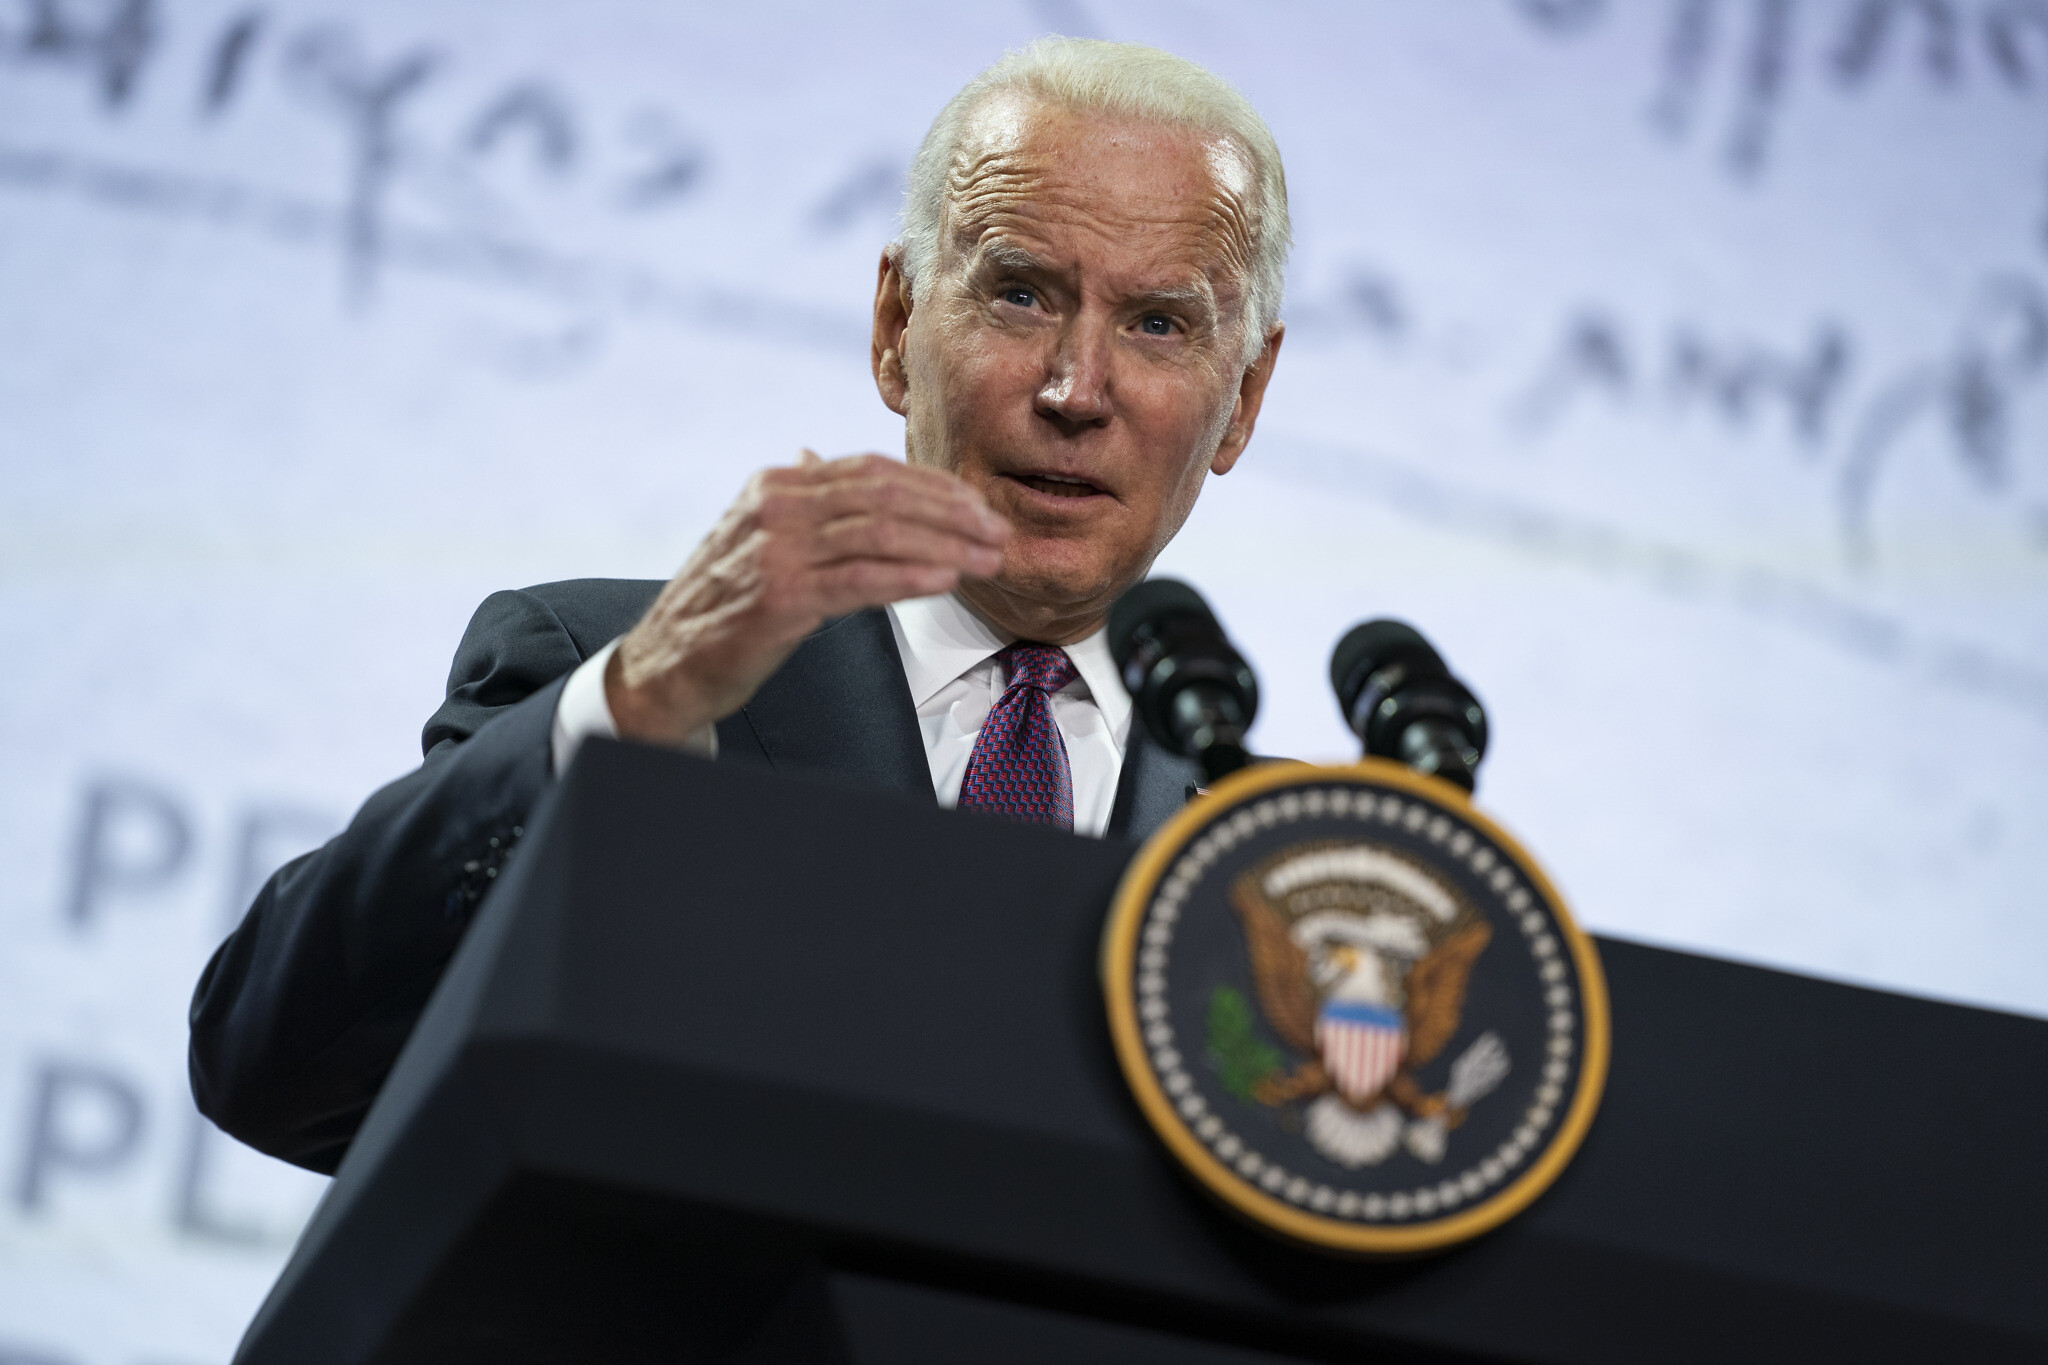 biden warns us will respond to iranian actions, including drone attacks | the times of israel